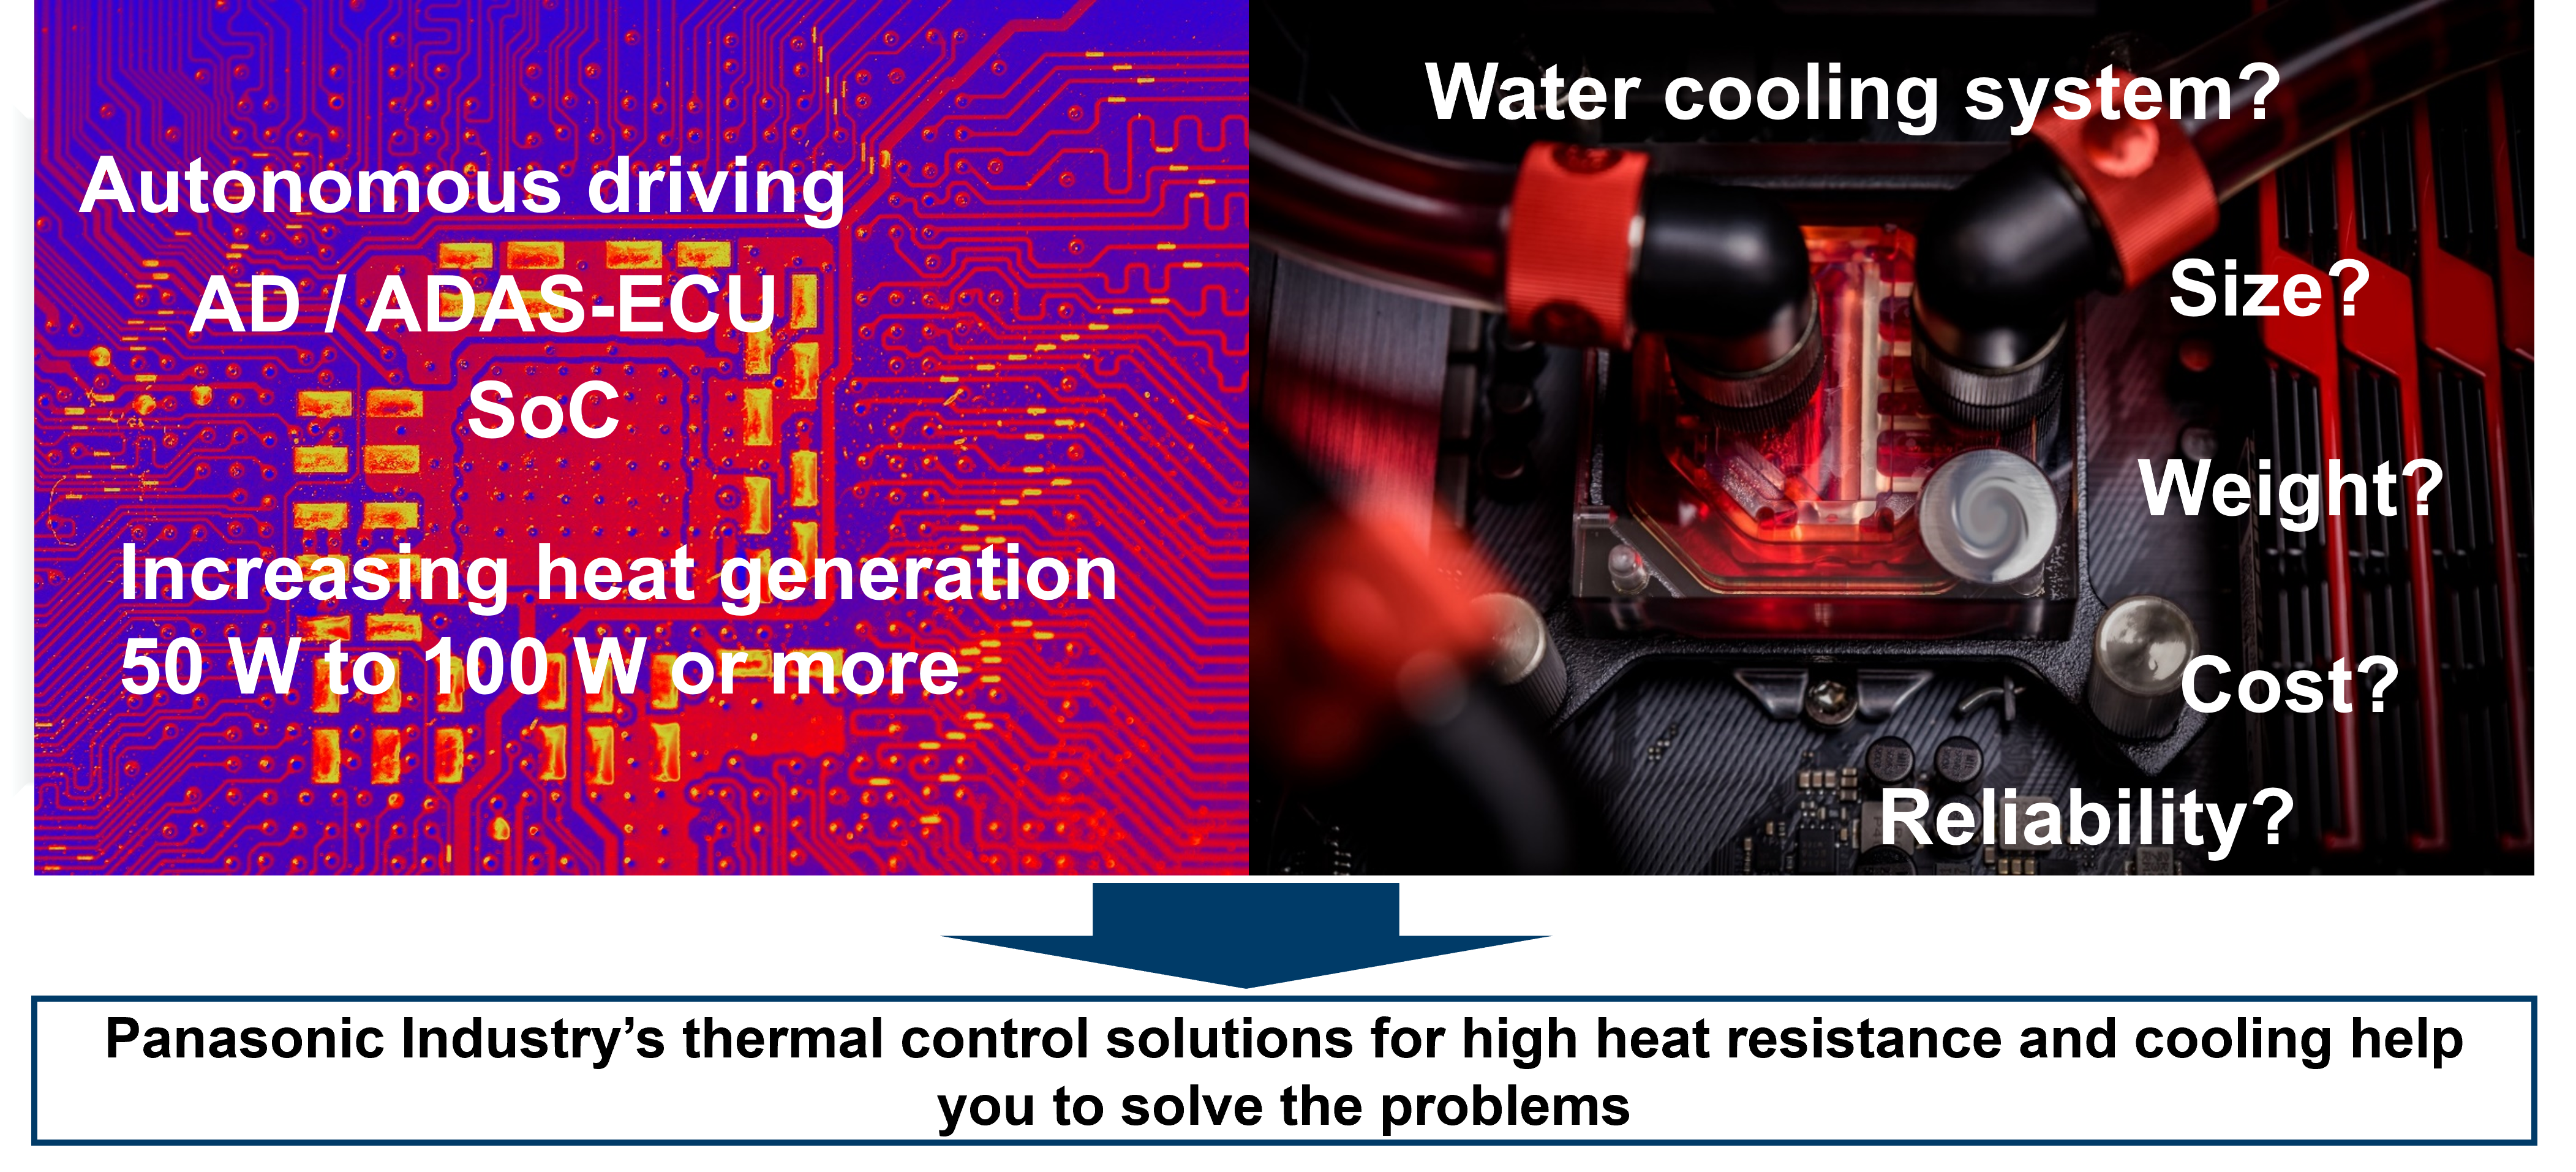 Increasing heat generation and a larger cooling system